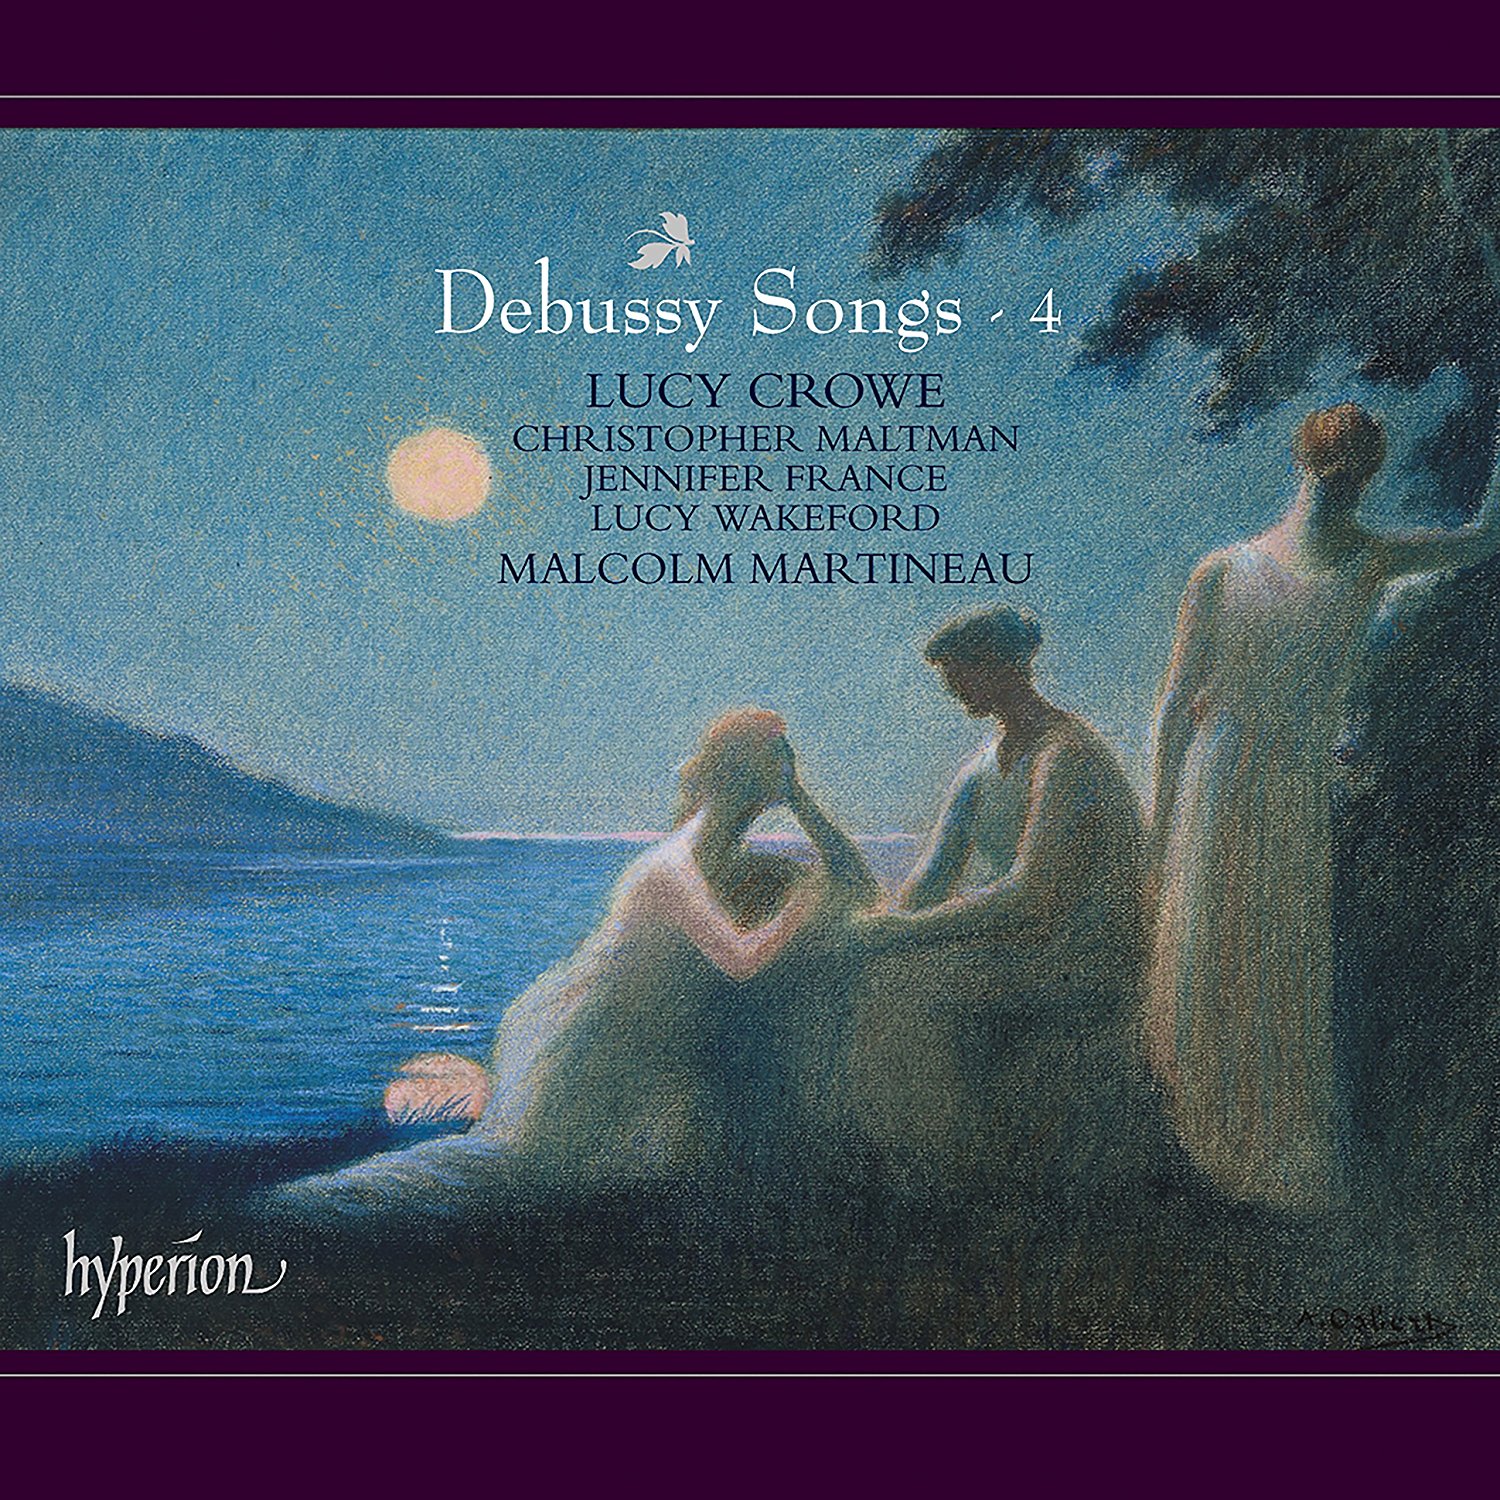 Debussy Songs, Hyperion